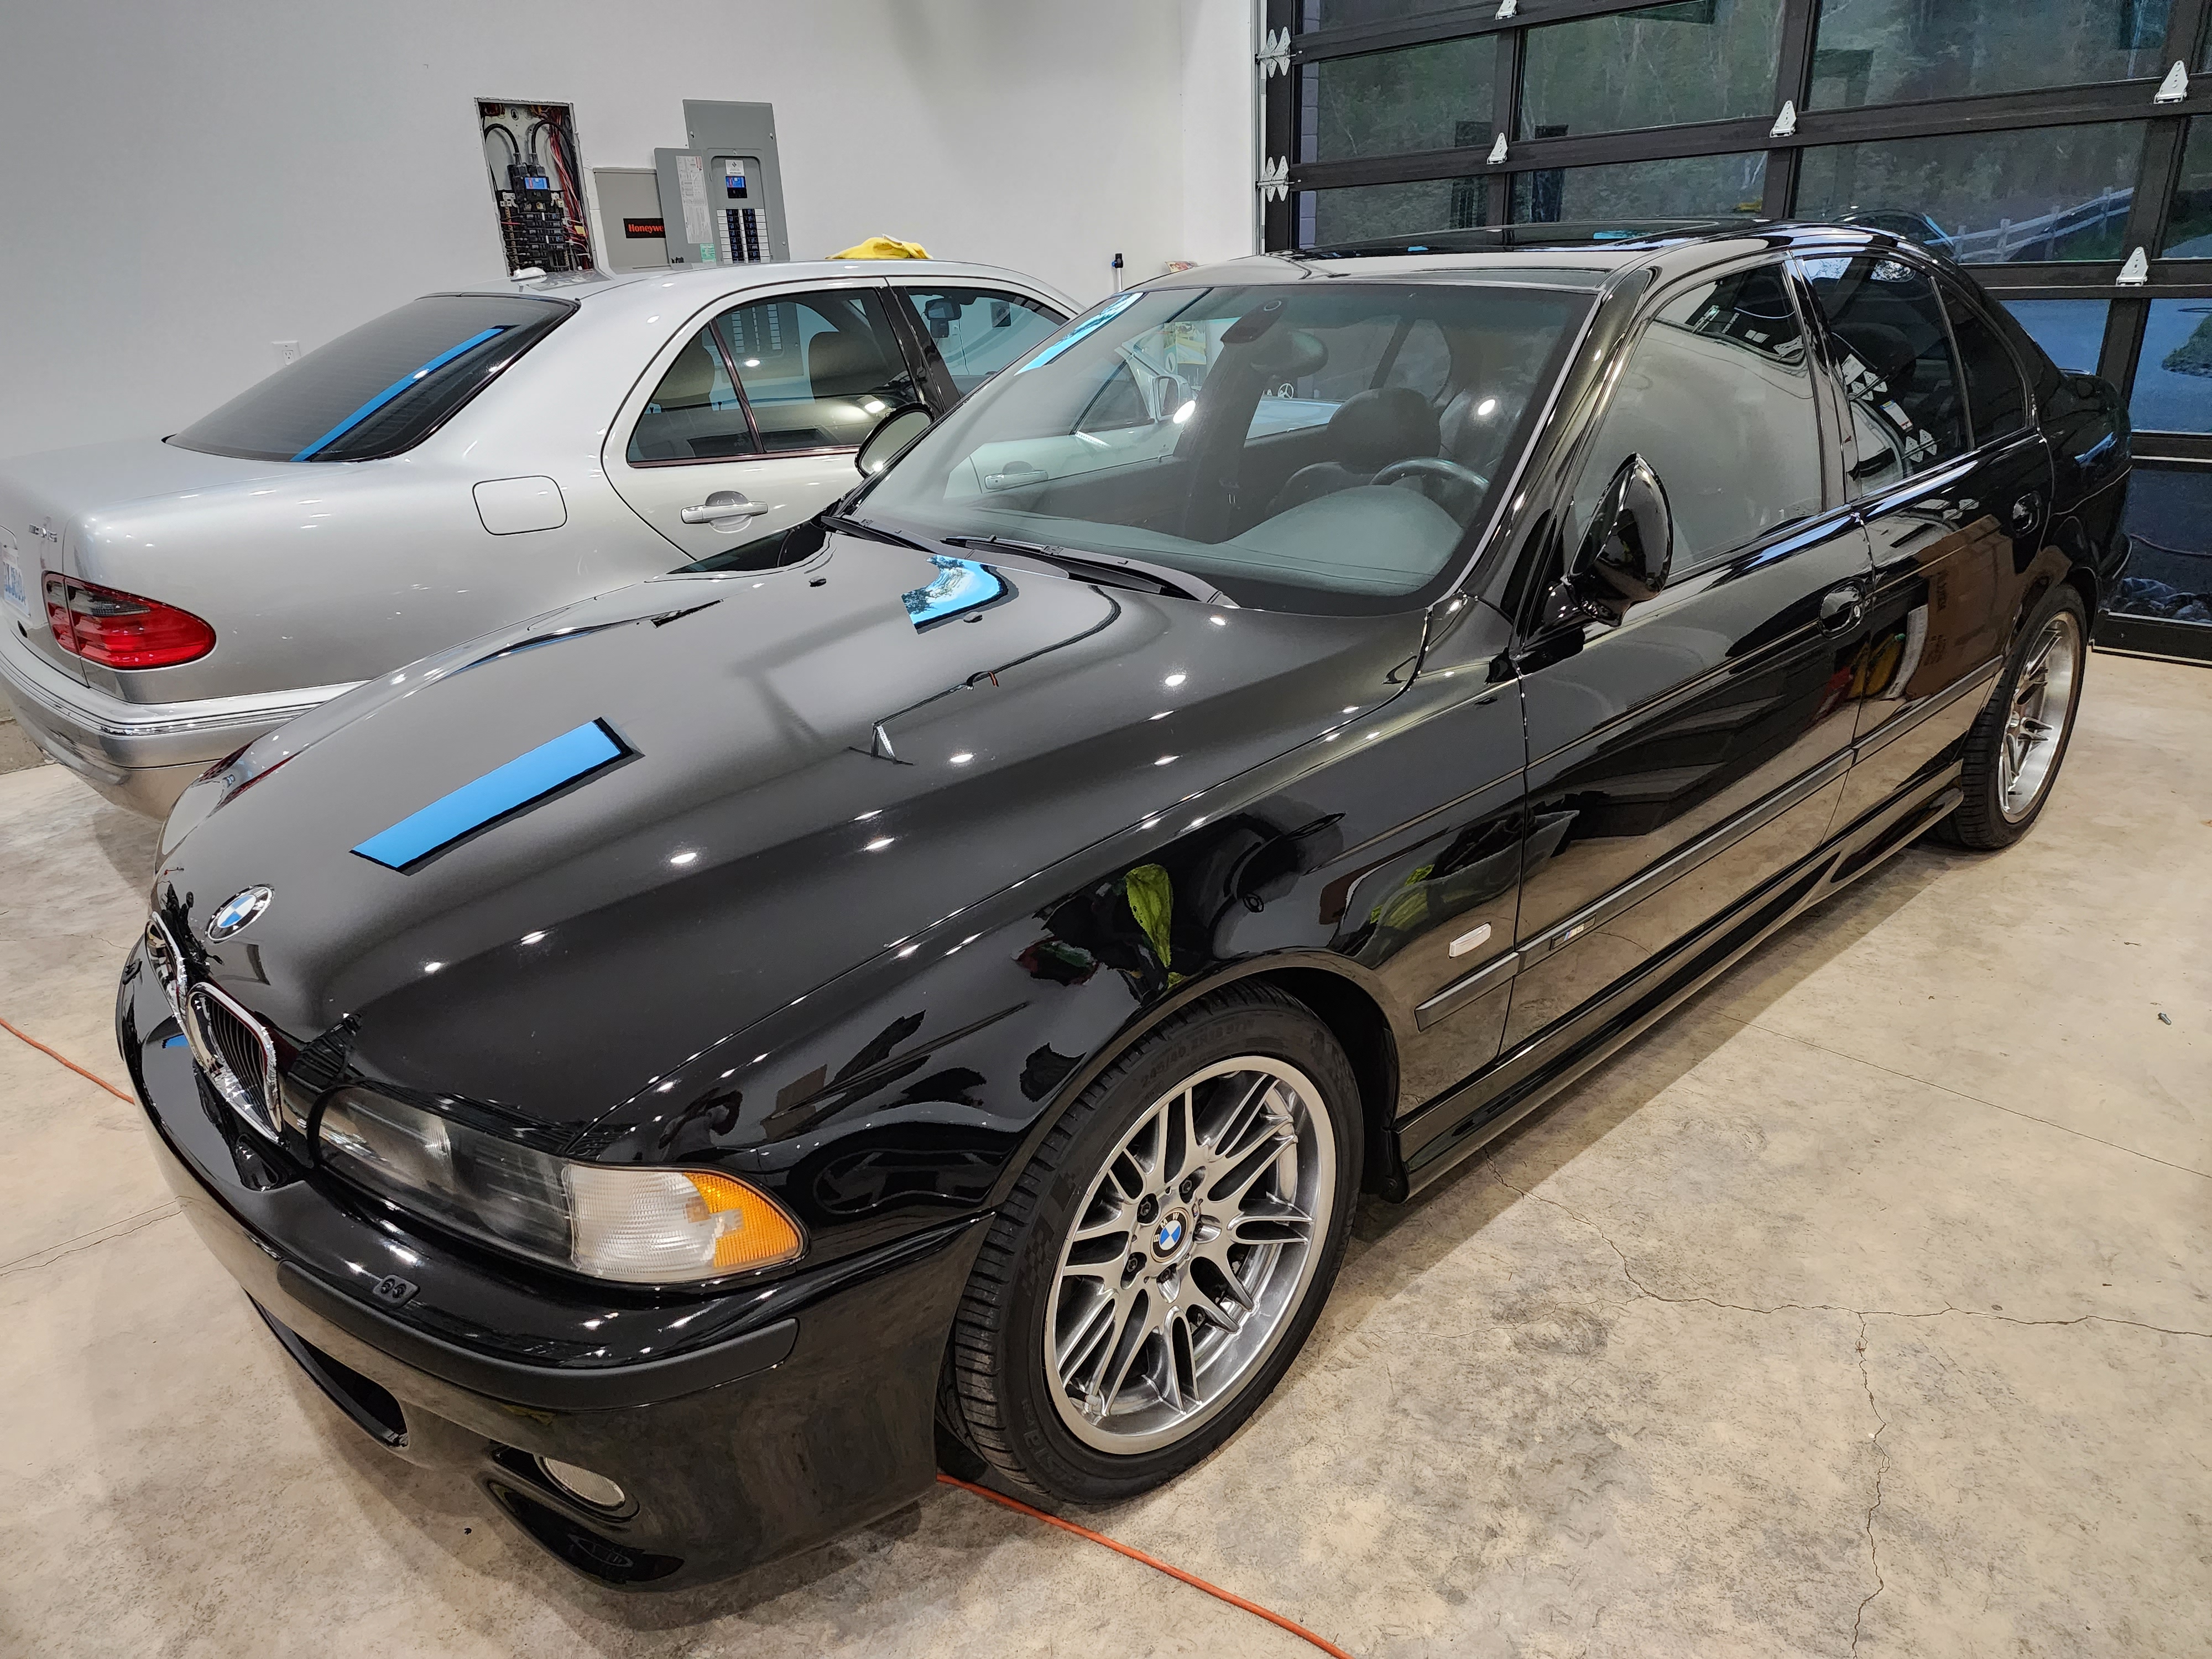 Used 2000 BMW M5 For Sale (Sold)  Exotic Motorsports of Oklahoma